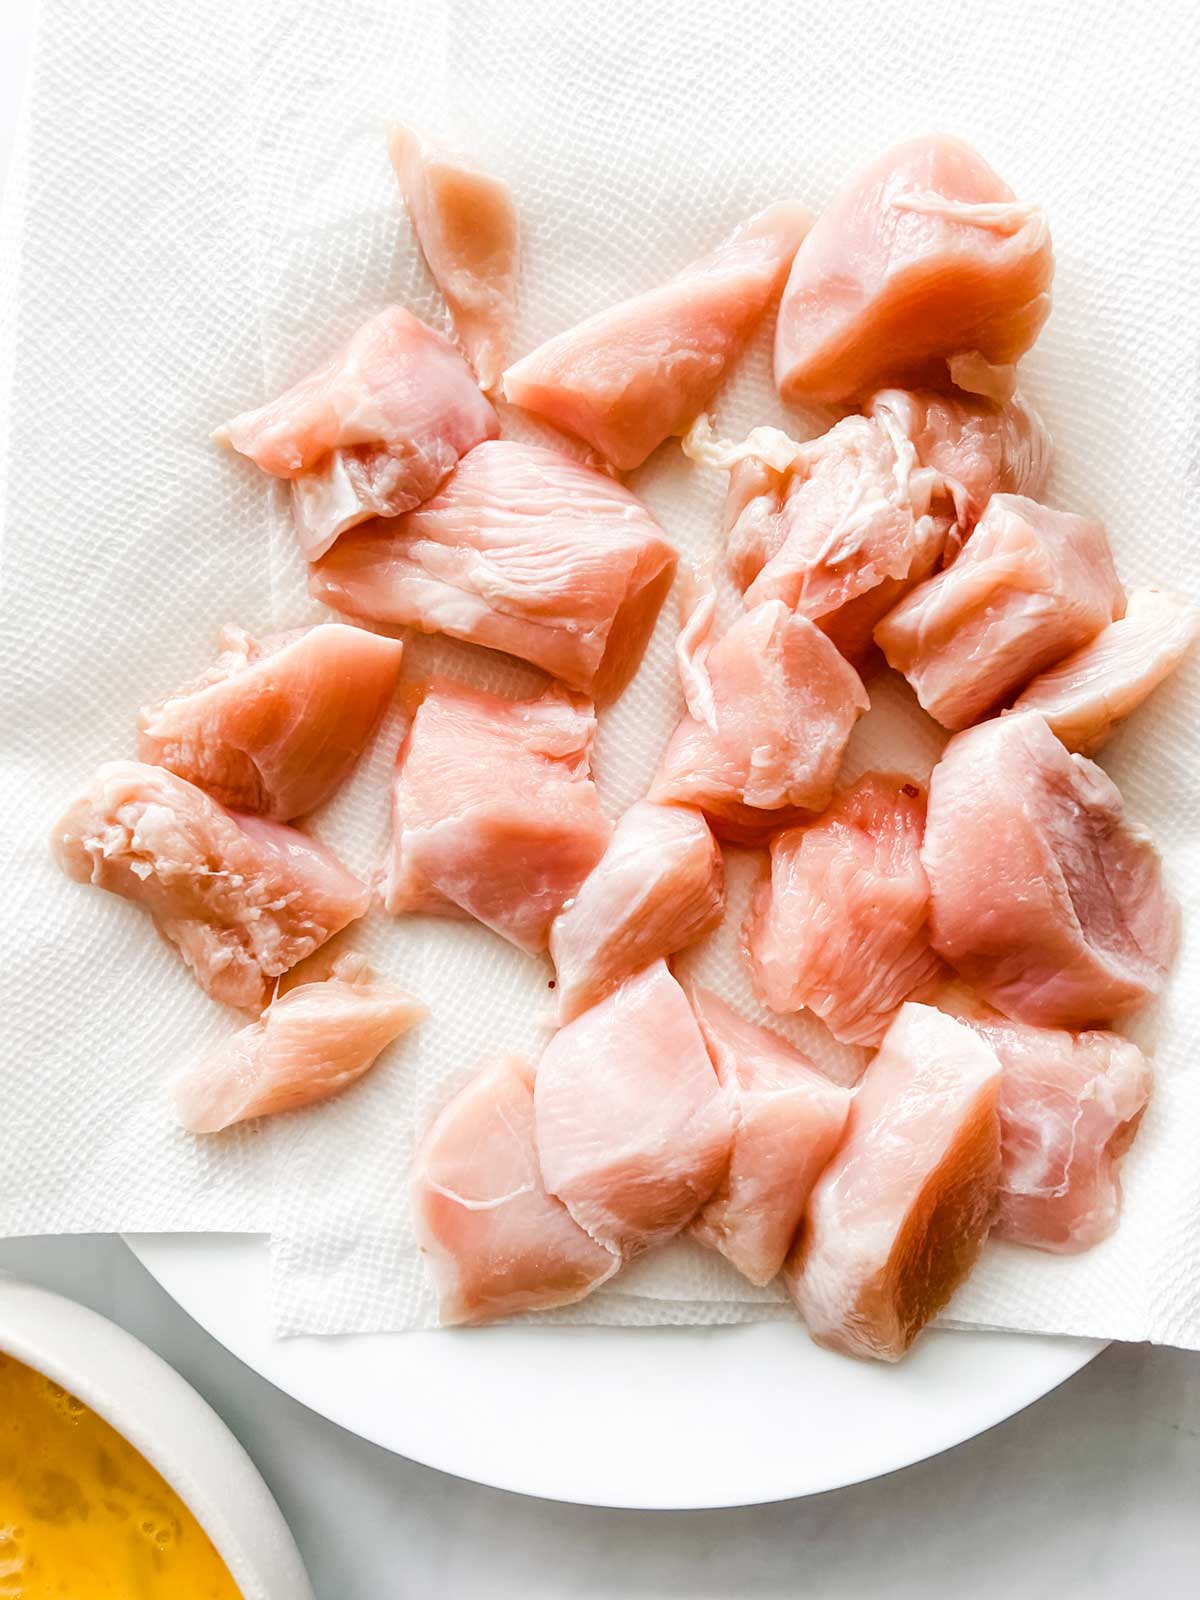 Photo of cubed chicken that is been brined sitting on a paper towel lined plate.